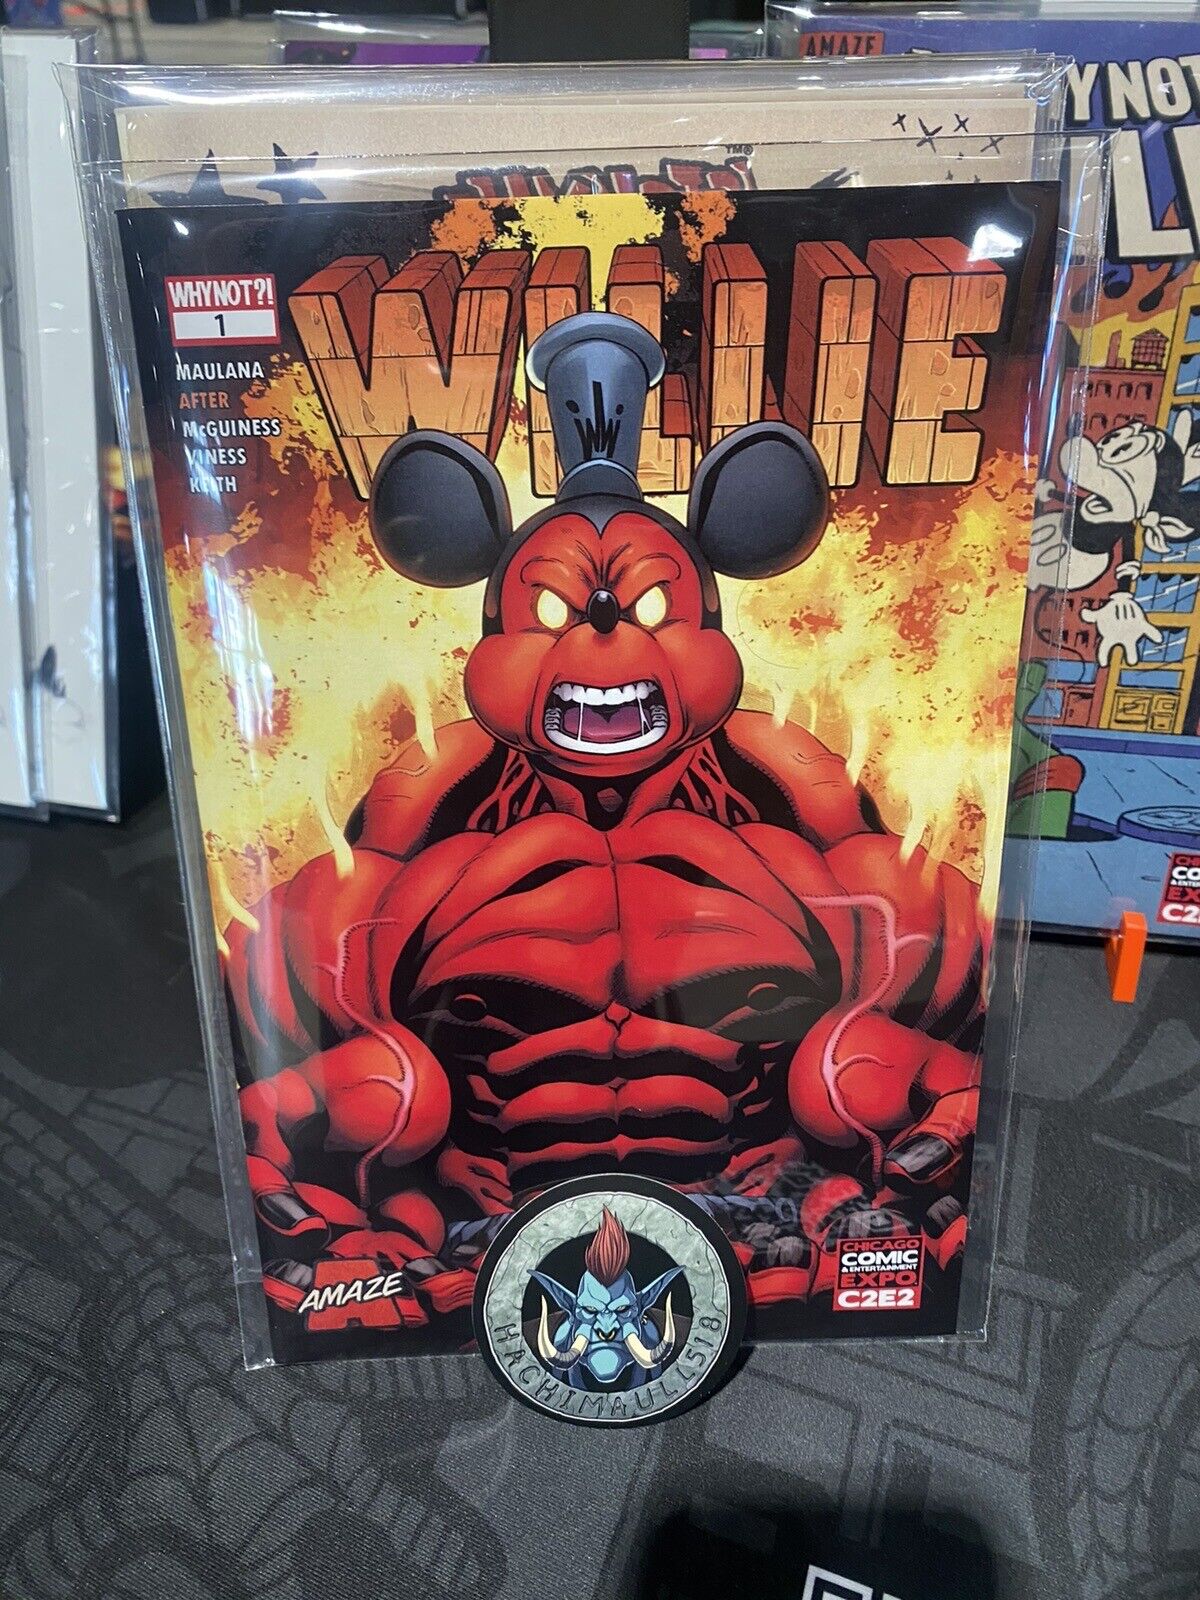 Why Not? Willie 1 Red Hulk C2E2 Exclusive Ltd 300 Ships 4/30